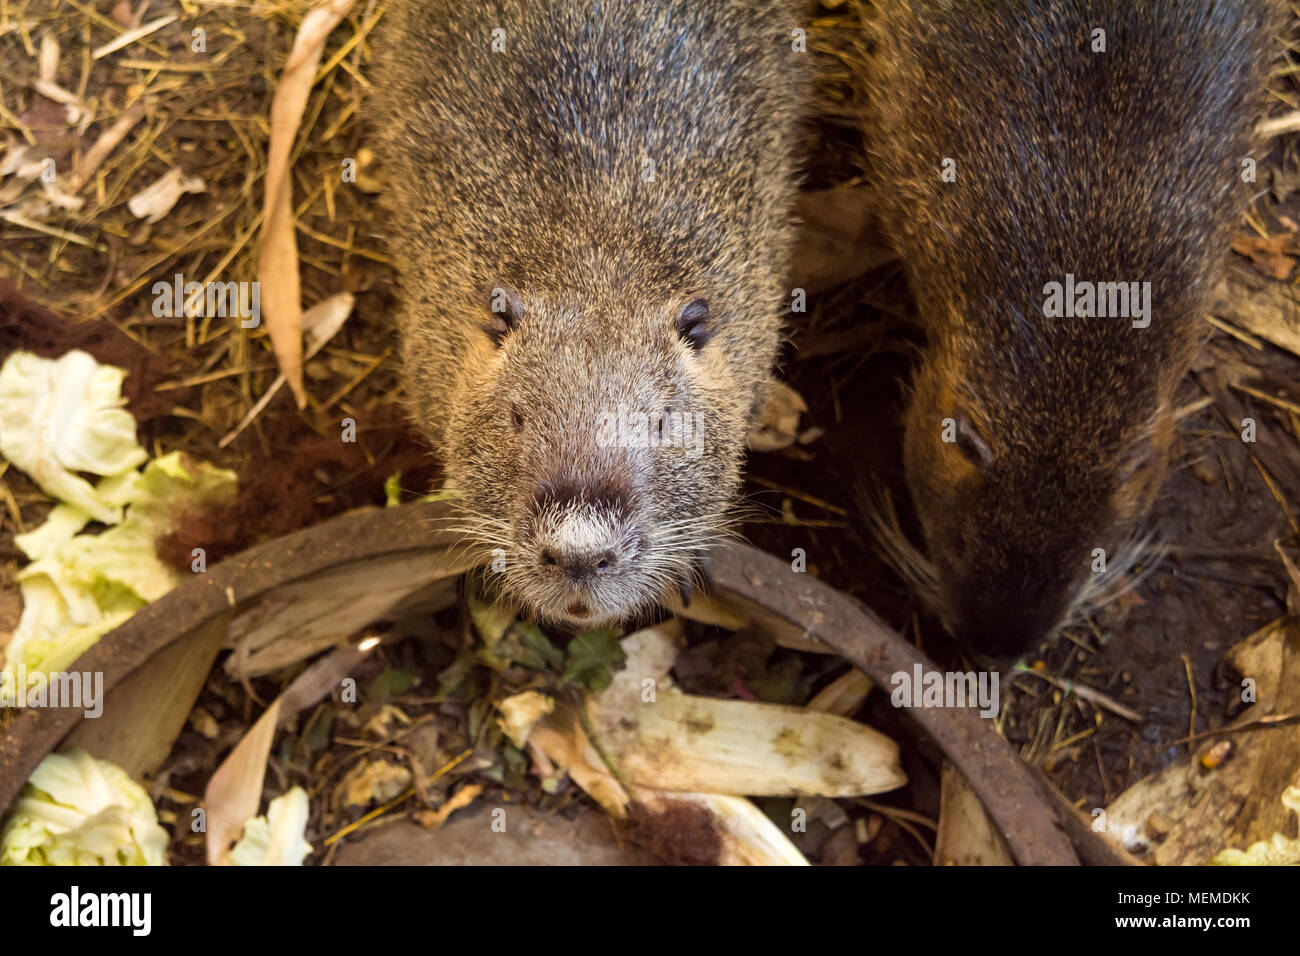 nutria farm. Close-up cultivation of nutria as valuable fur and ellitic meat. Stock Photo